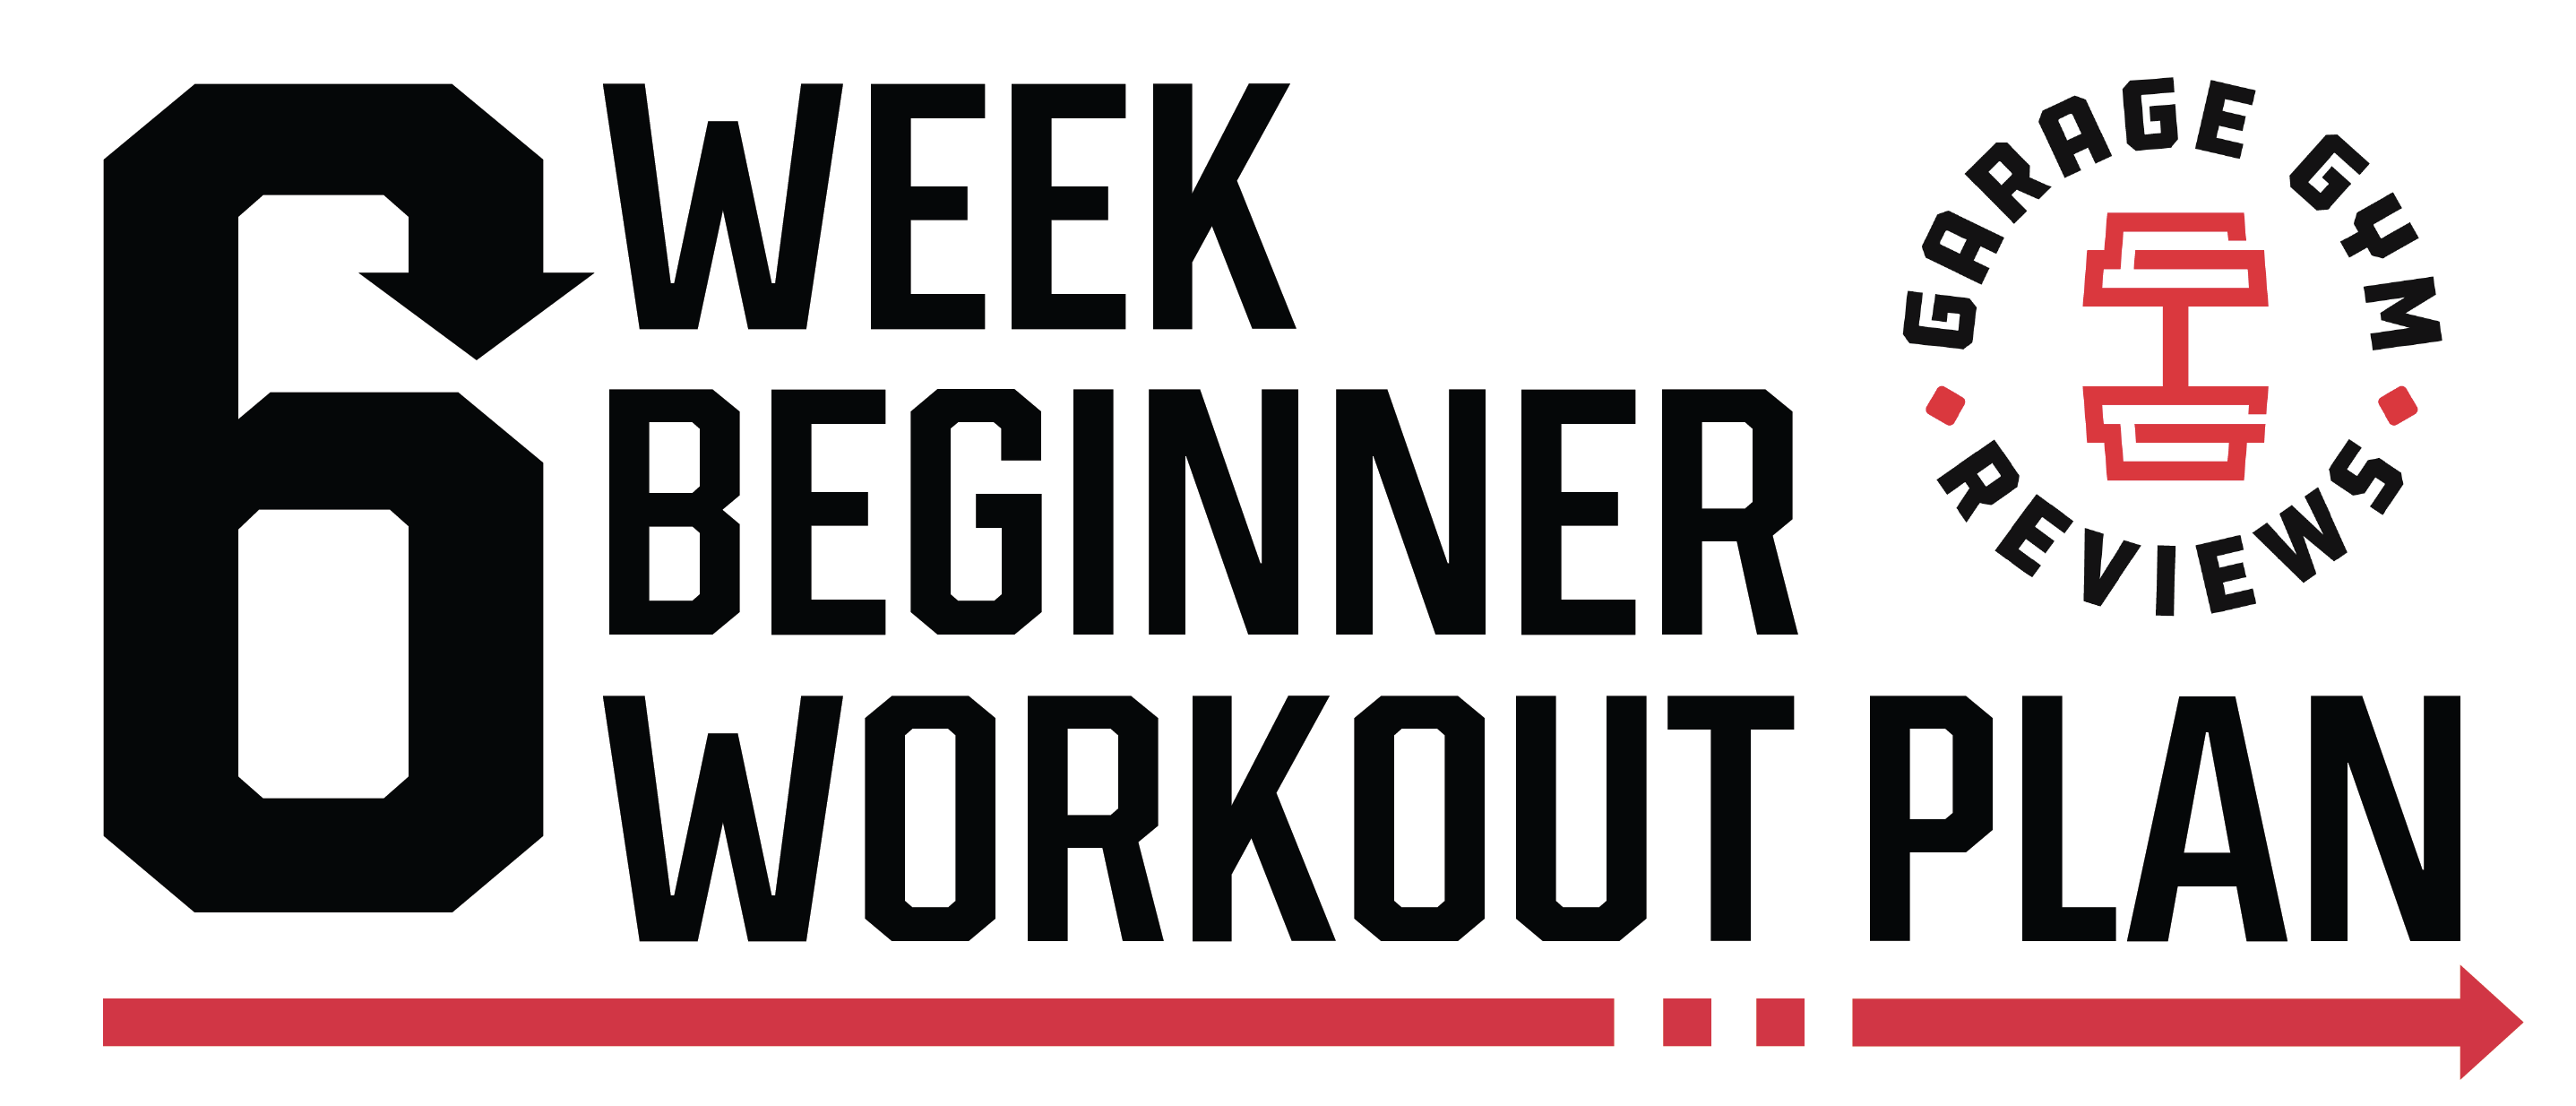 6-Week Beginner Workout Plan and Tips For Getting Started